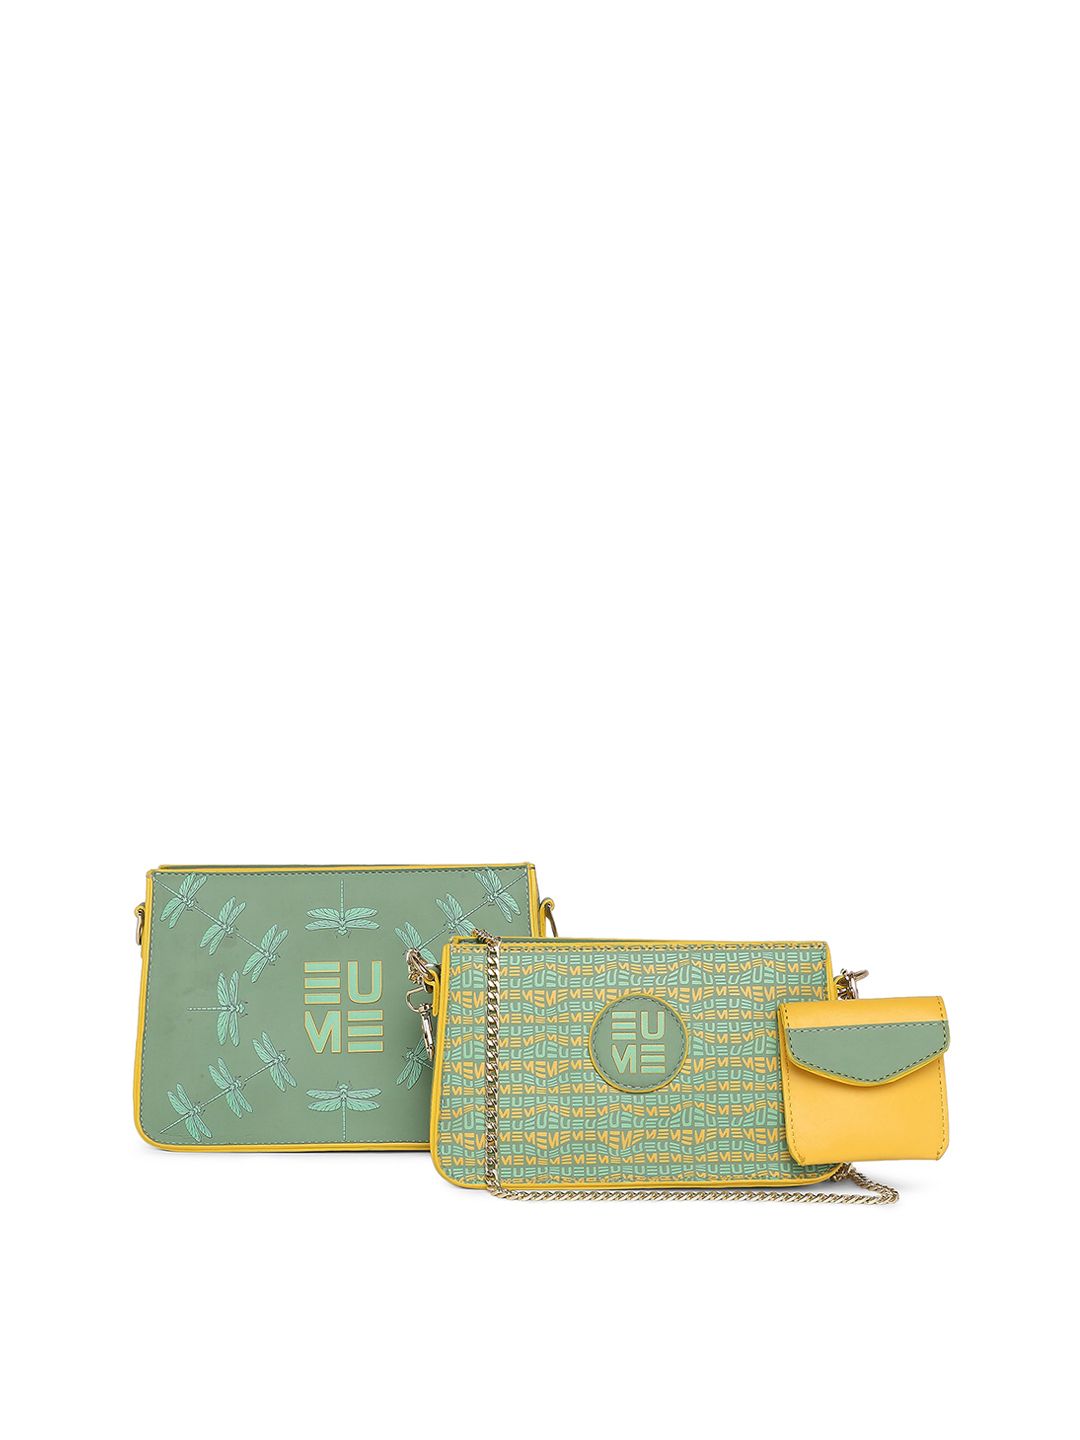 EUME Green Geometric Printed Structured Sling Bag Price in India